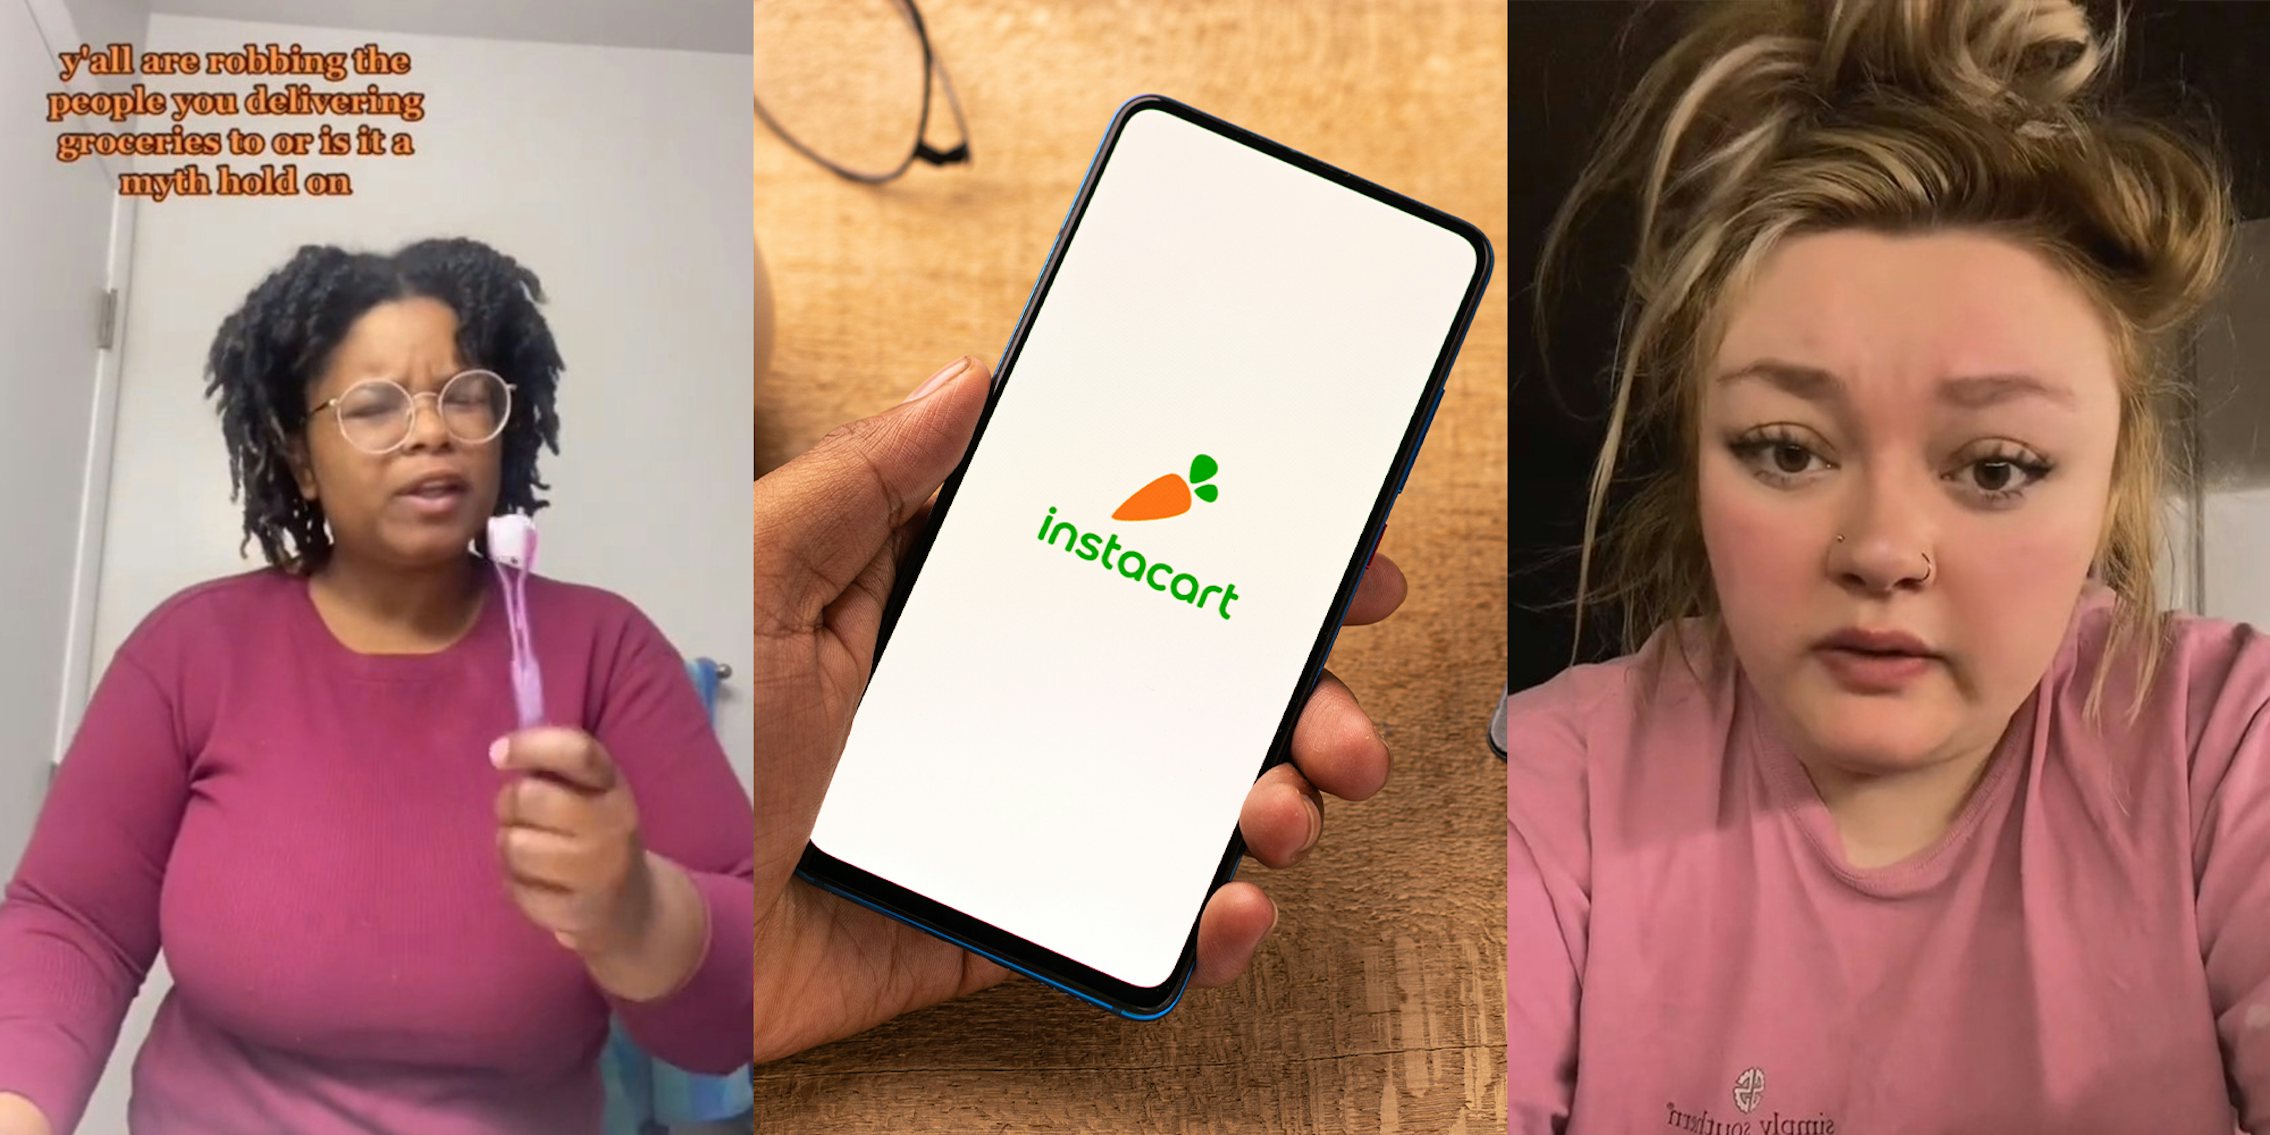 woman explains how instacart drivers are scamming people